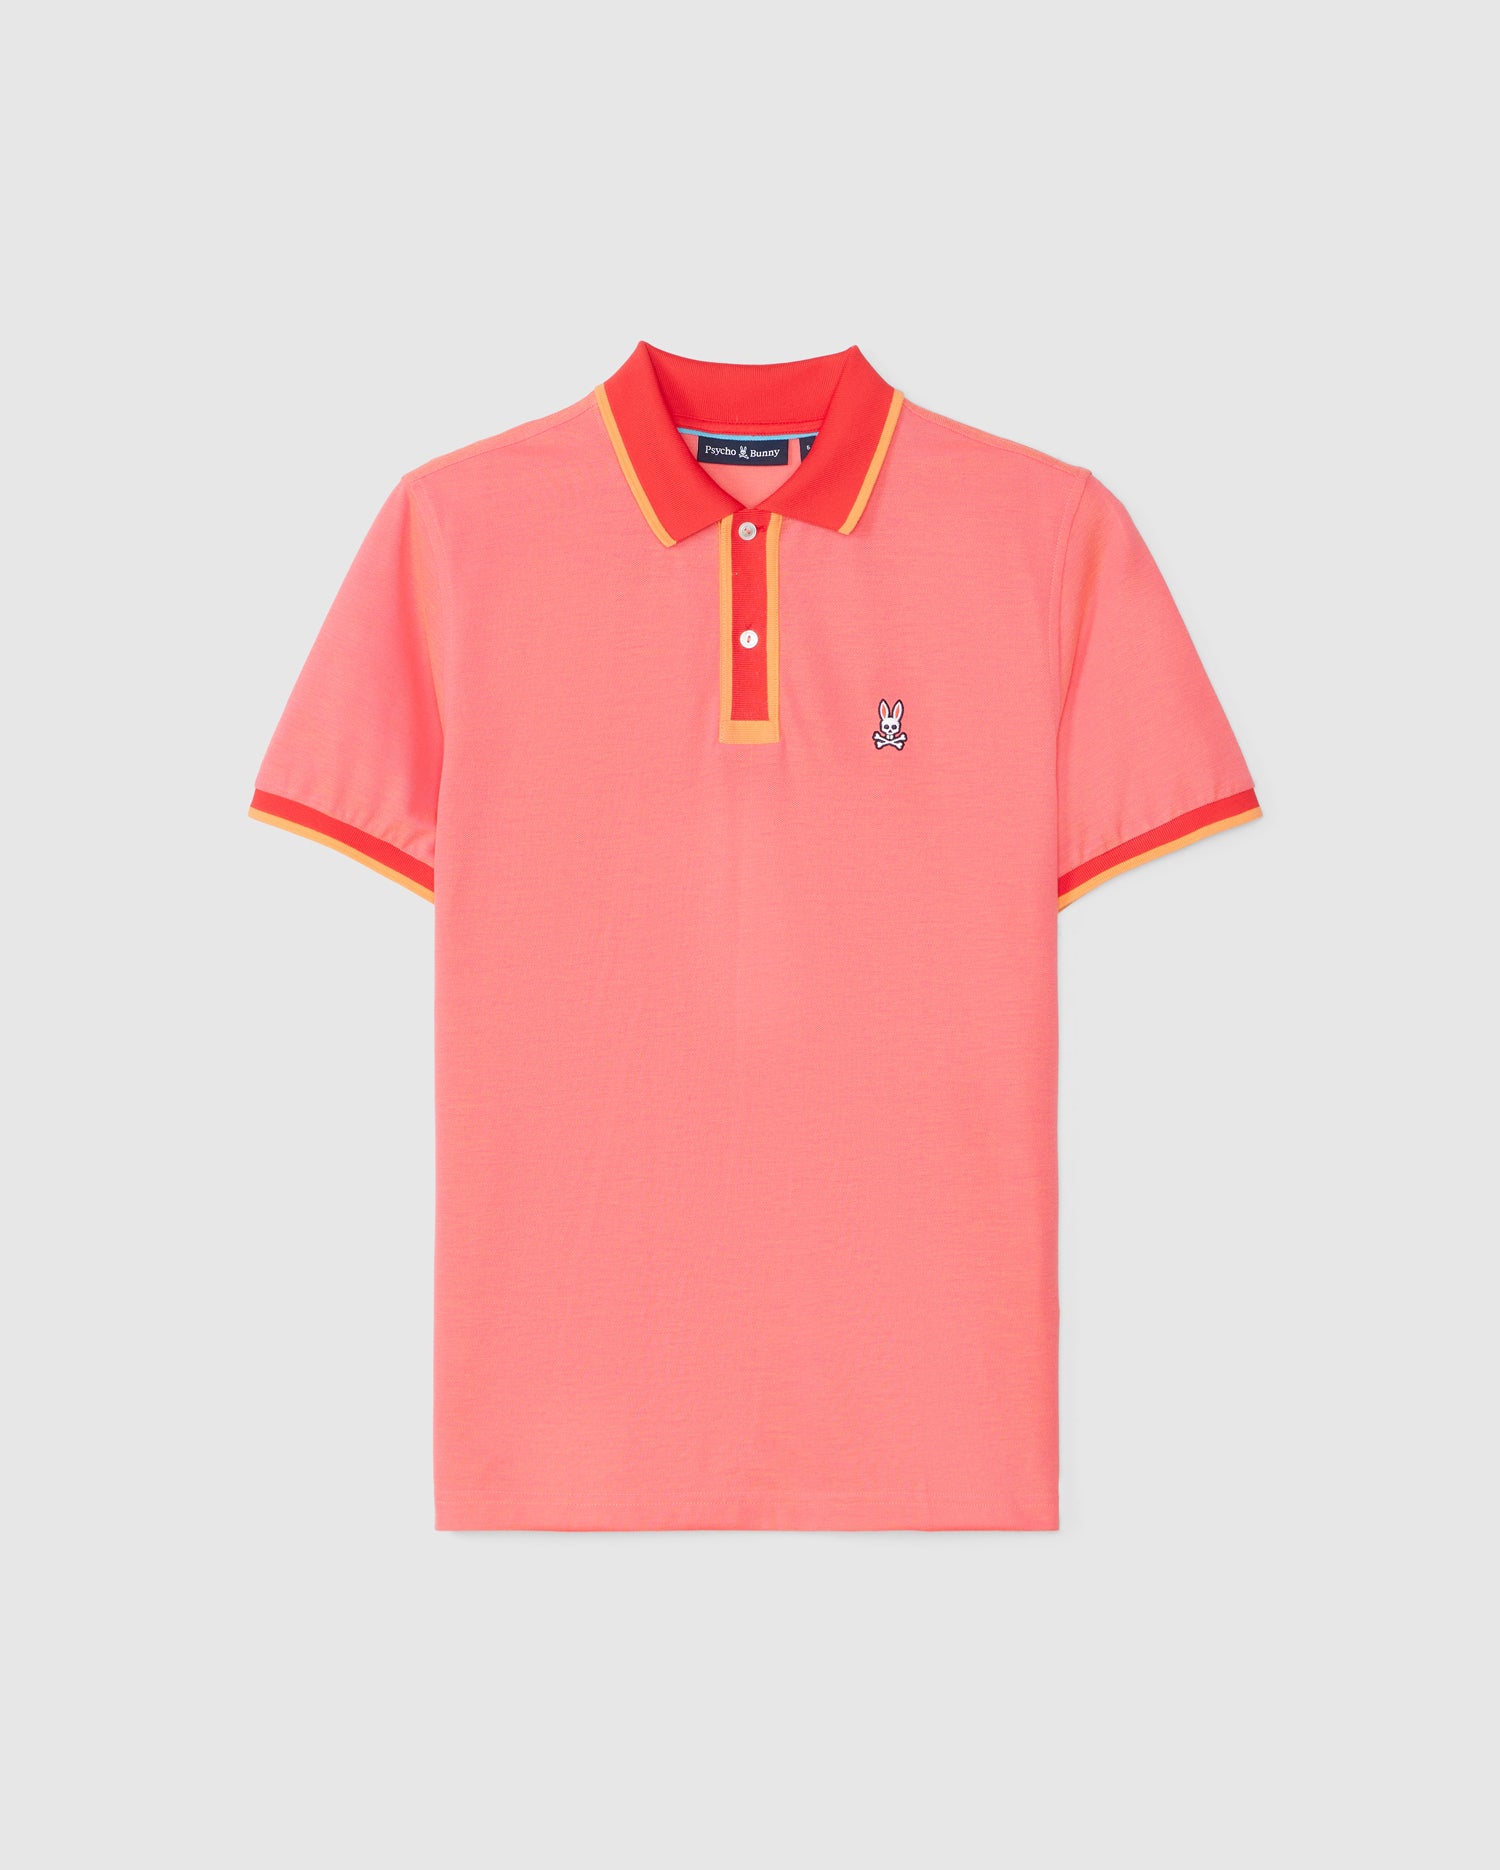 MENS WOODWAY OXFORD POLO - B6K405C200